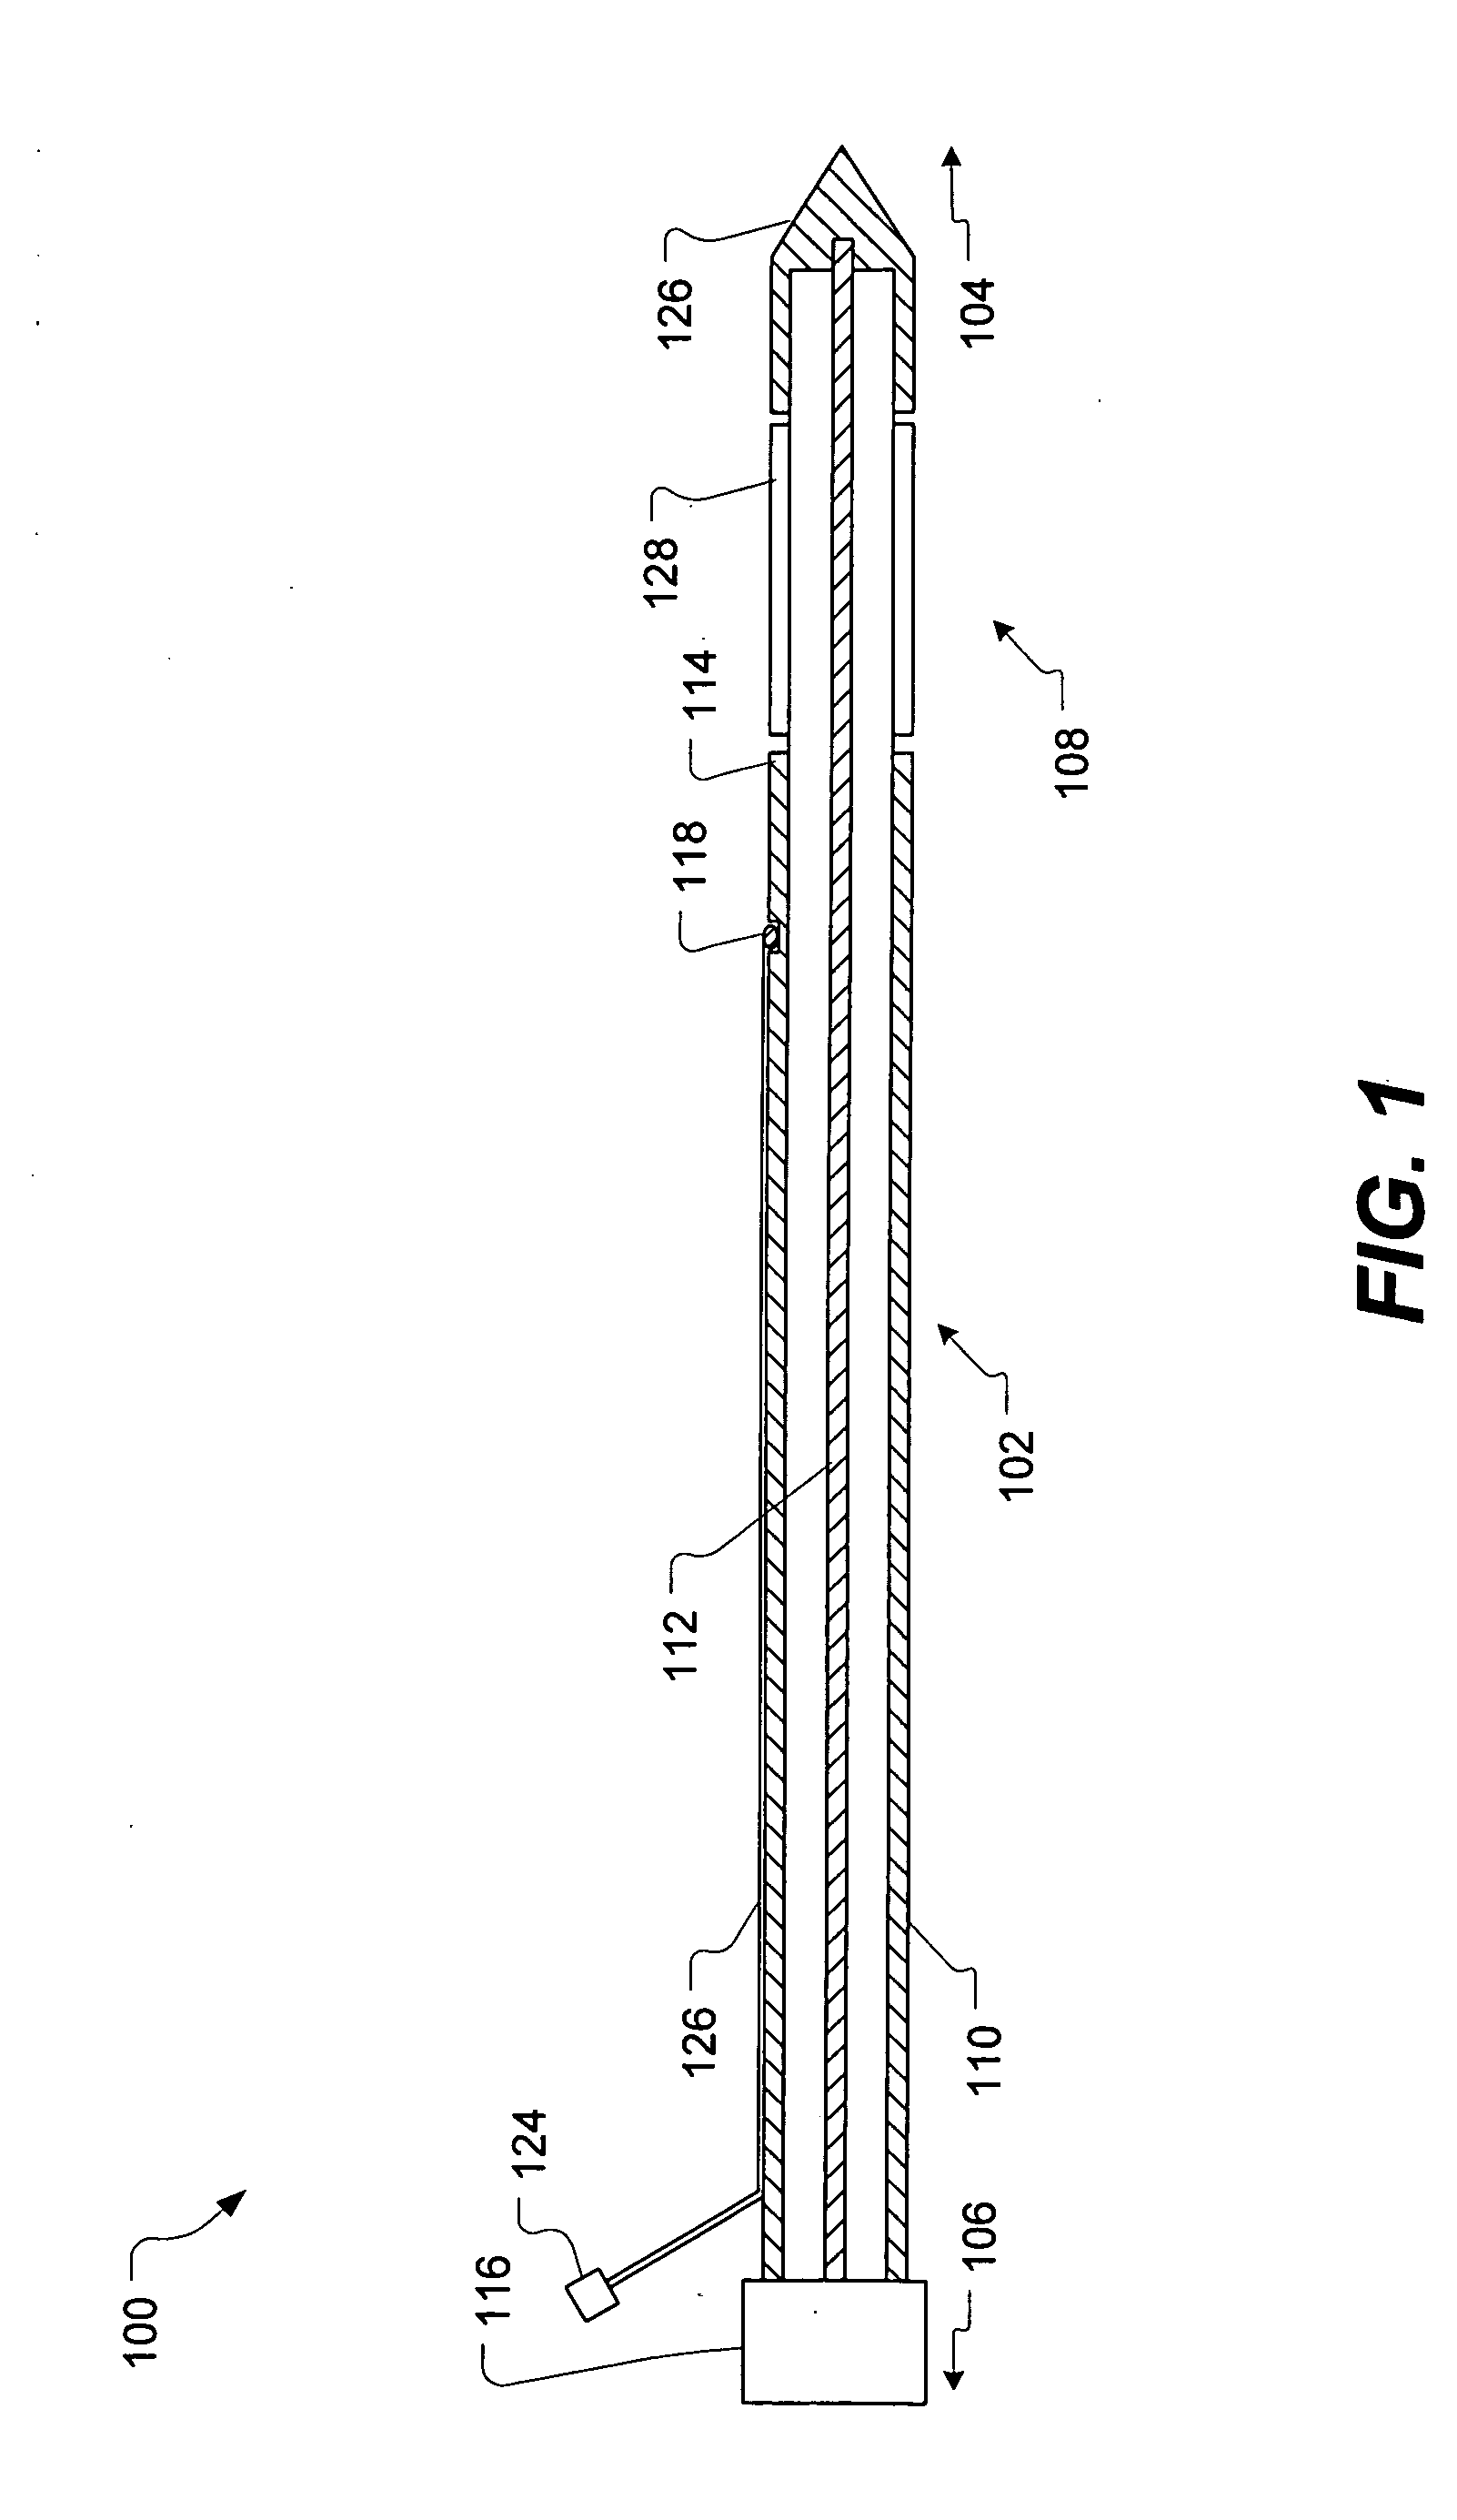 Microwave applicator with adjustable heating length